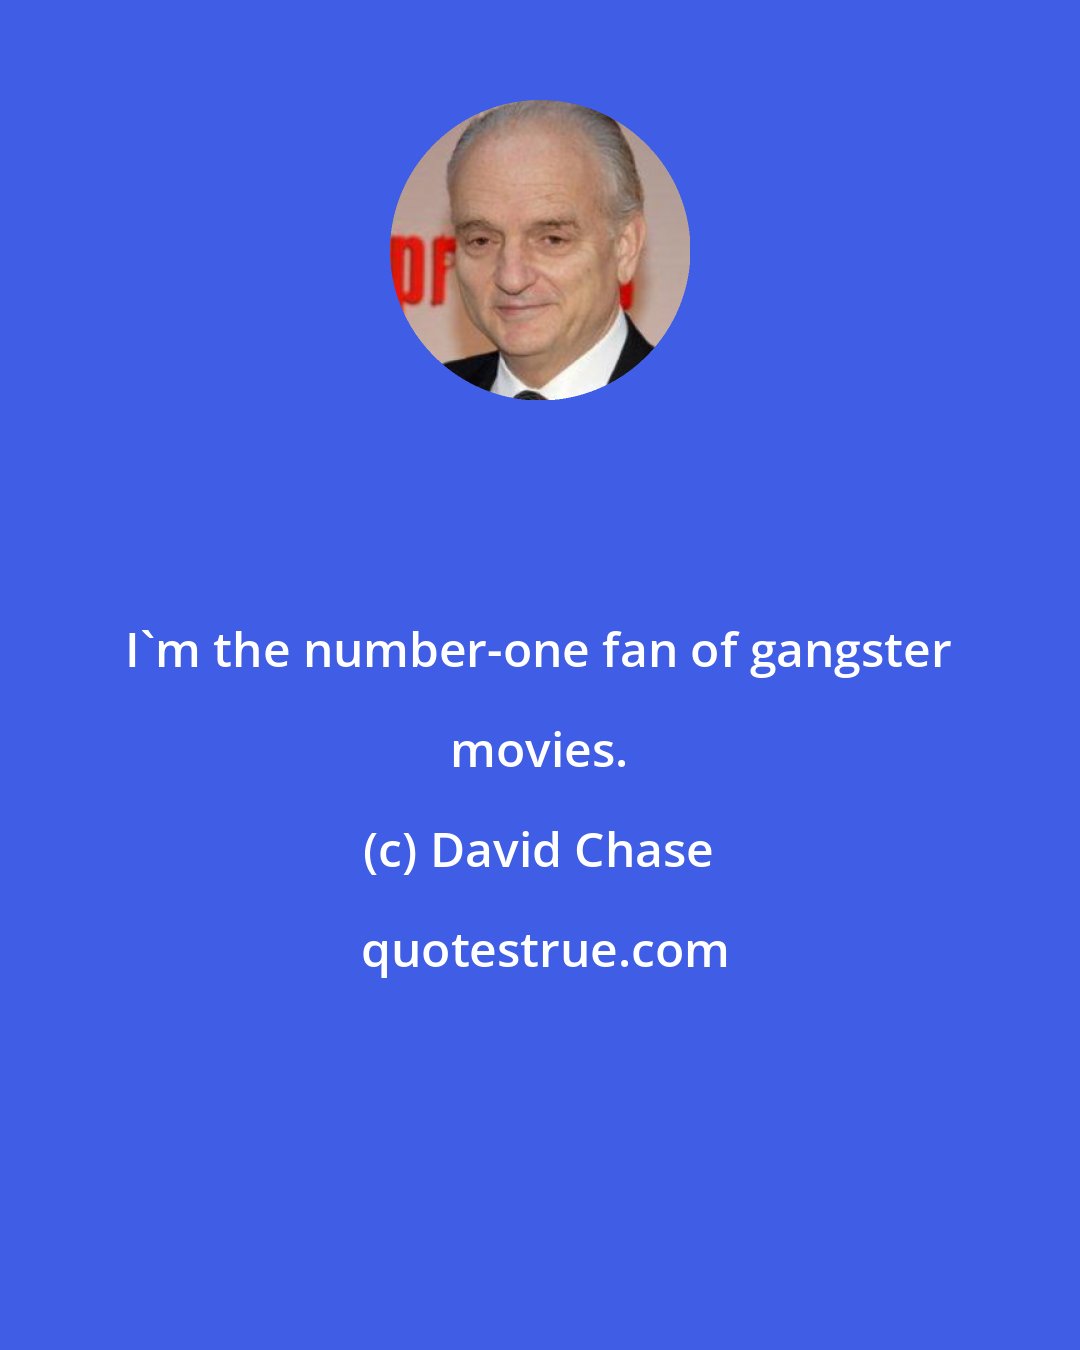 David Chase: I'm the number-one fan of gangster movies.